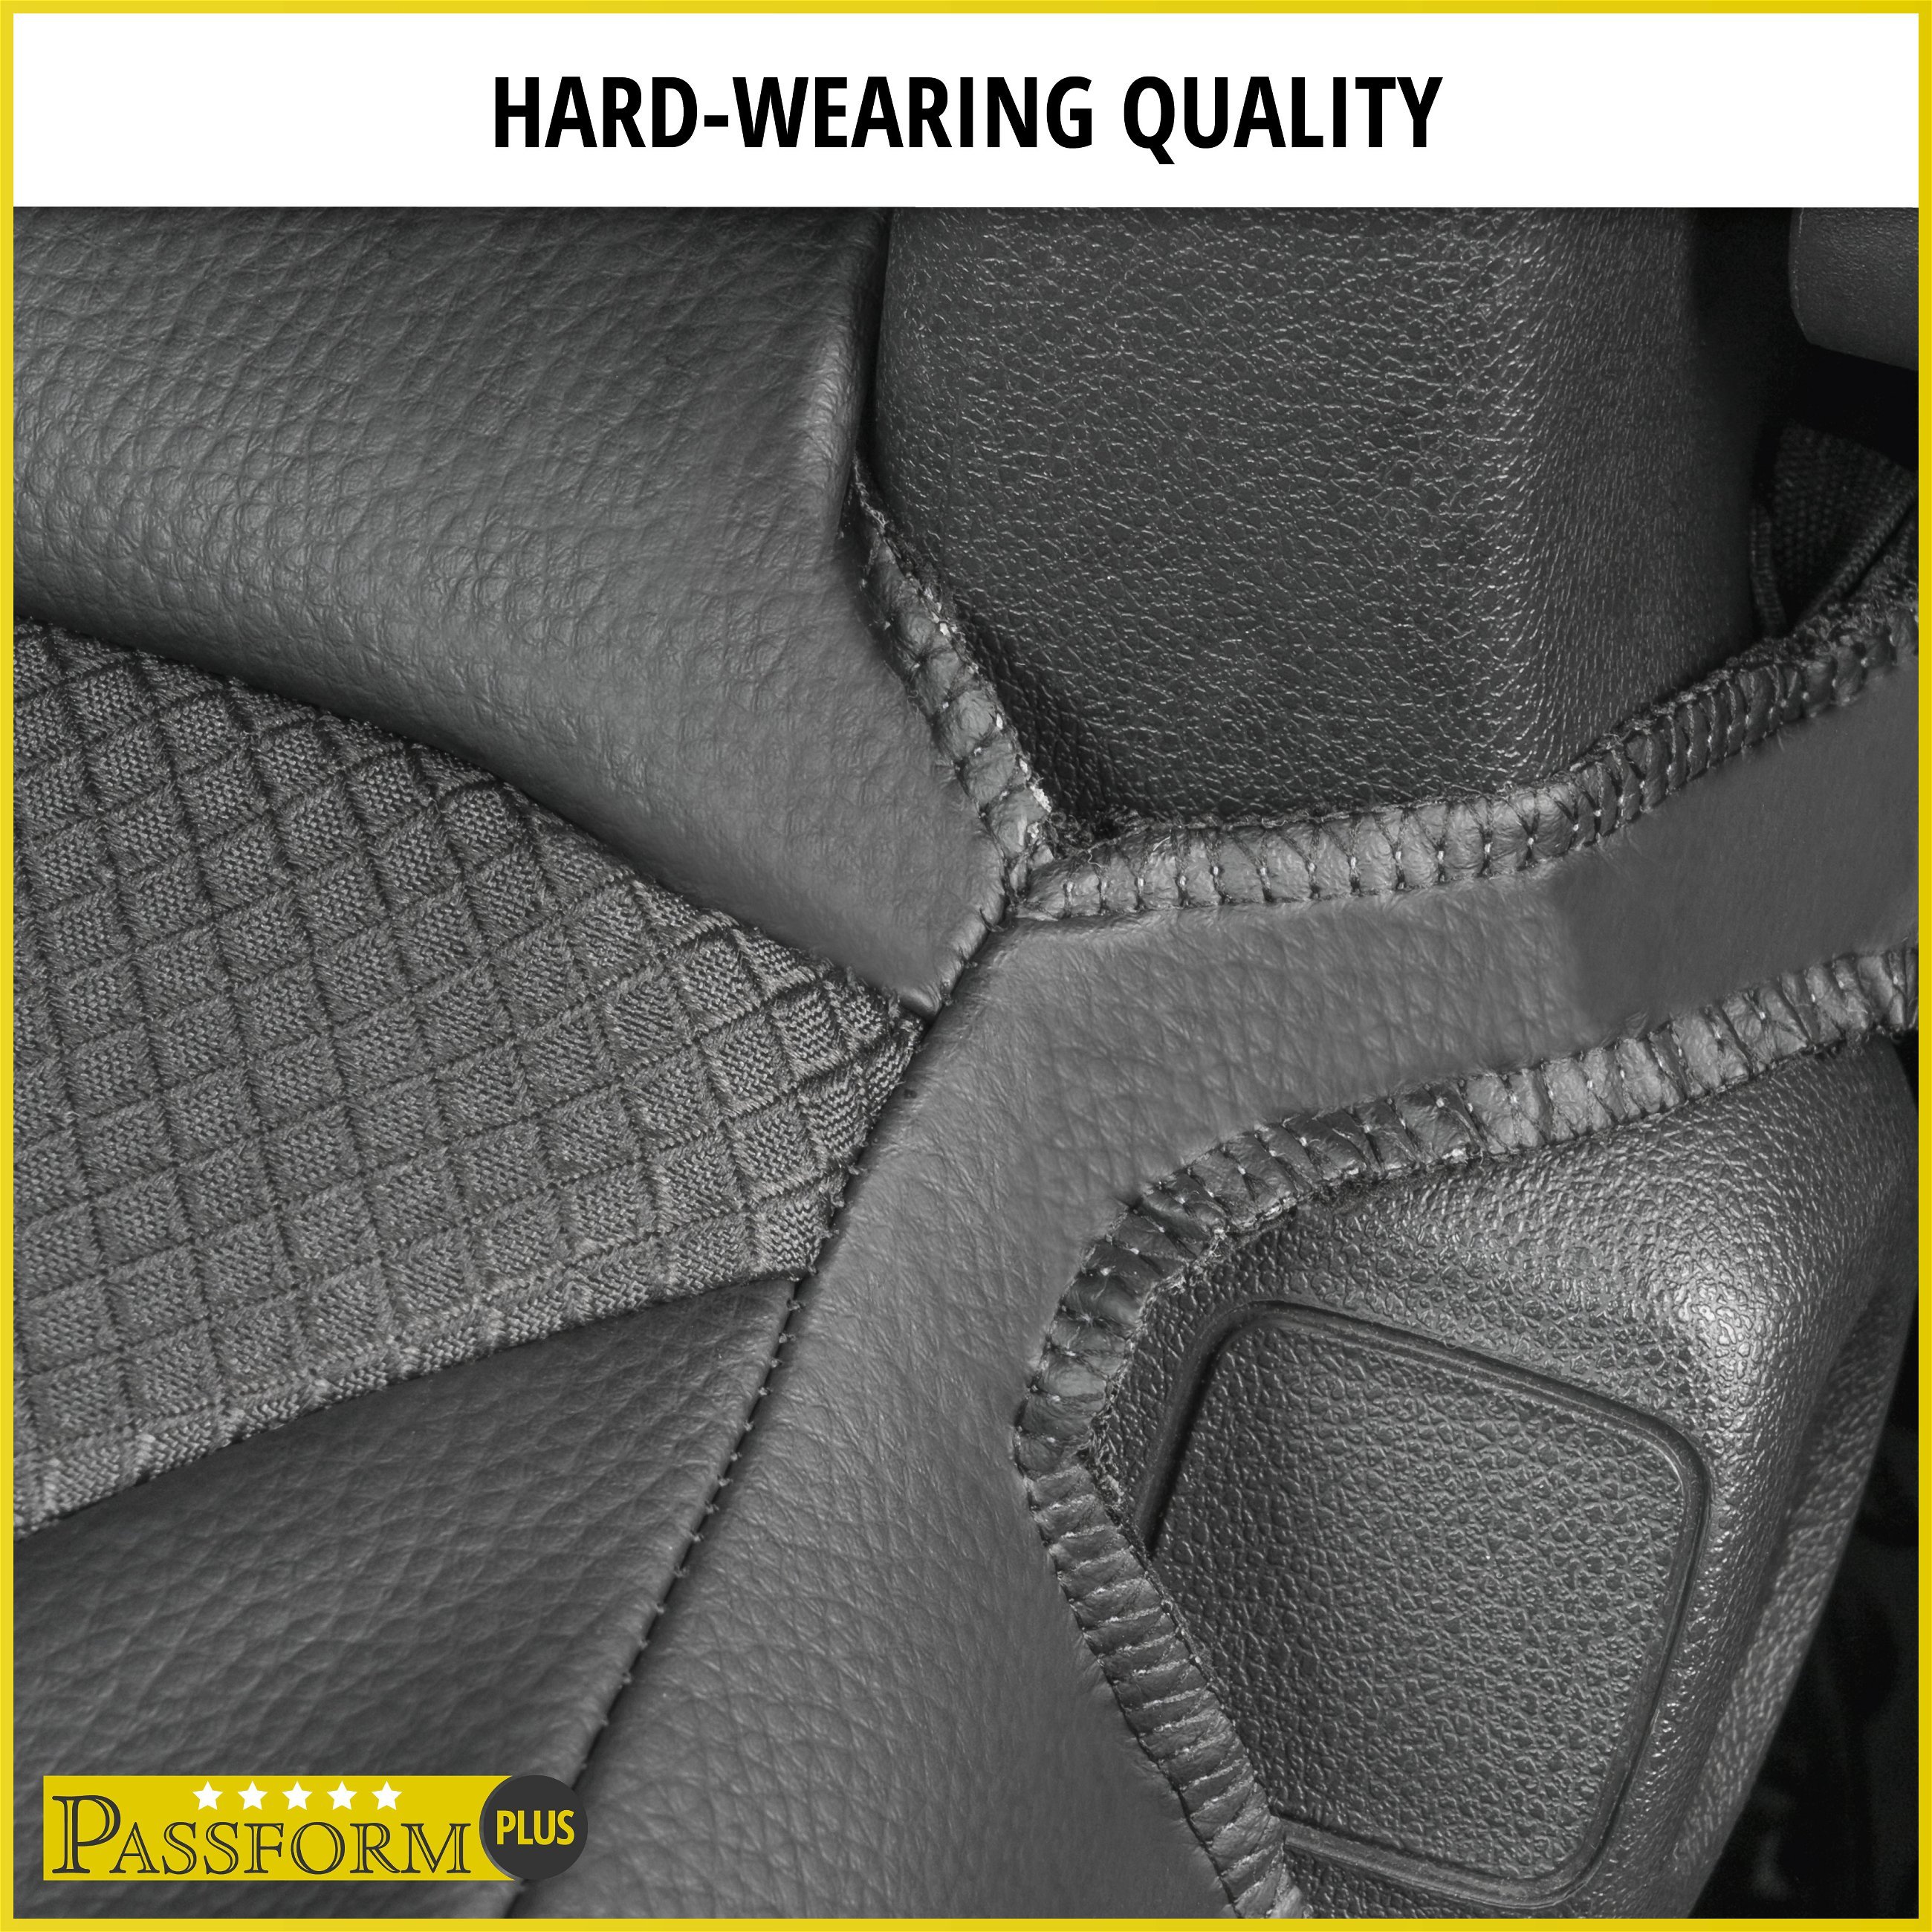 Premium Seat Cover for Mercedes-Benz Sprinter 02/2018-Today, 1 single seat cover front + armrest cover, 1 double bench cover